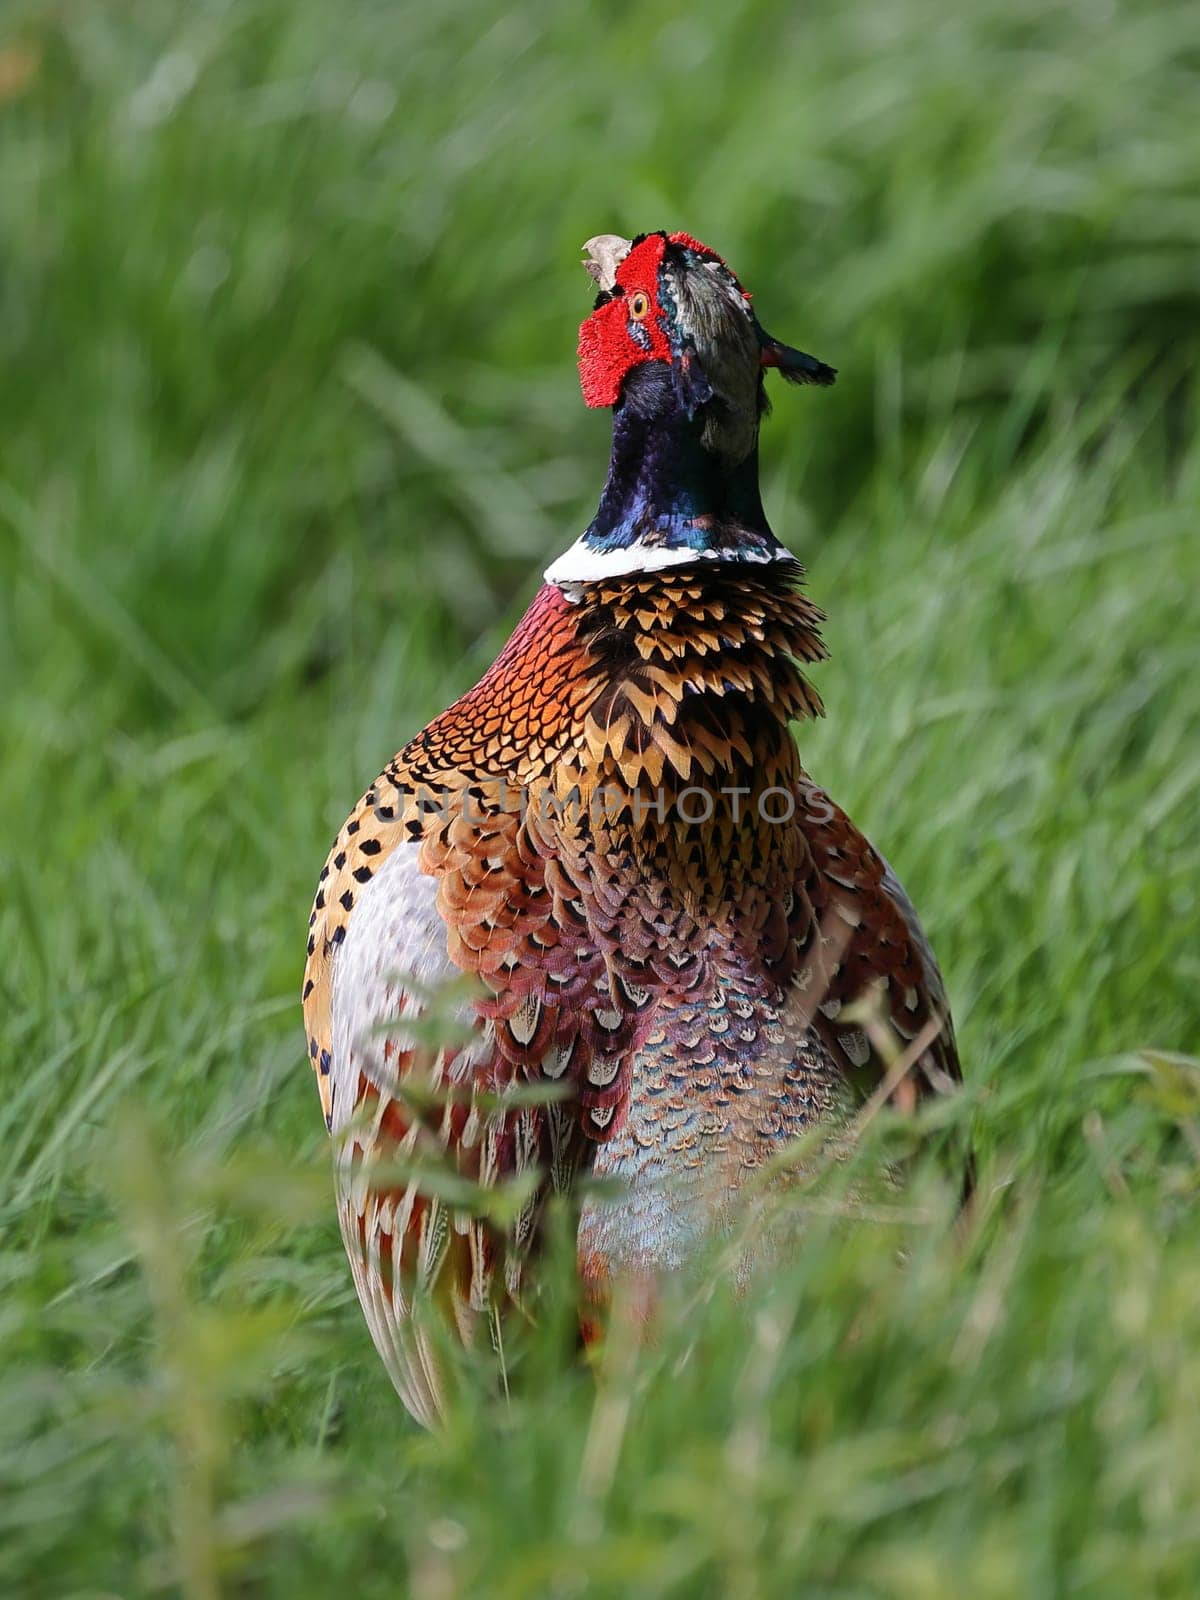 A close up image of an adult male pheasant in Northern England.